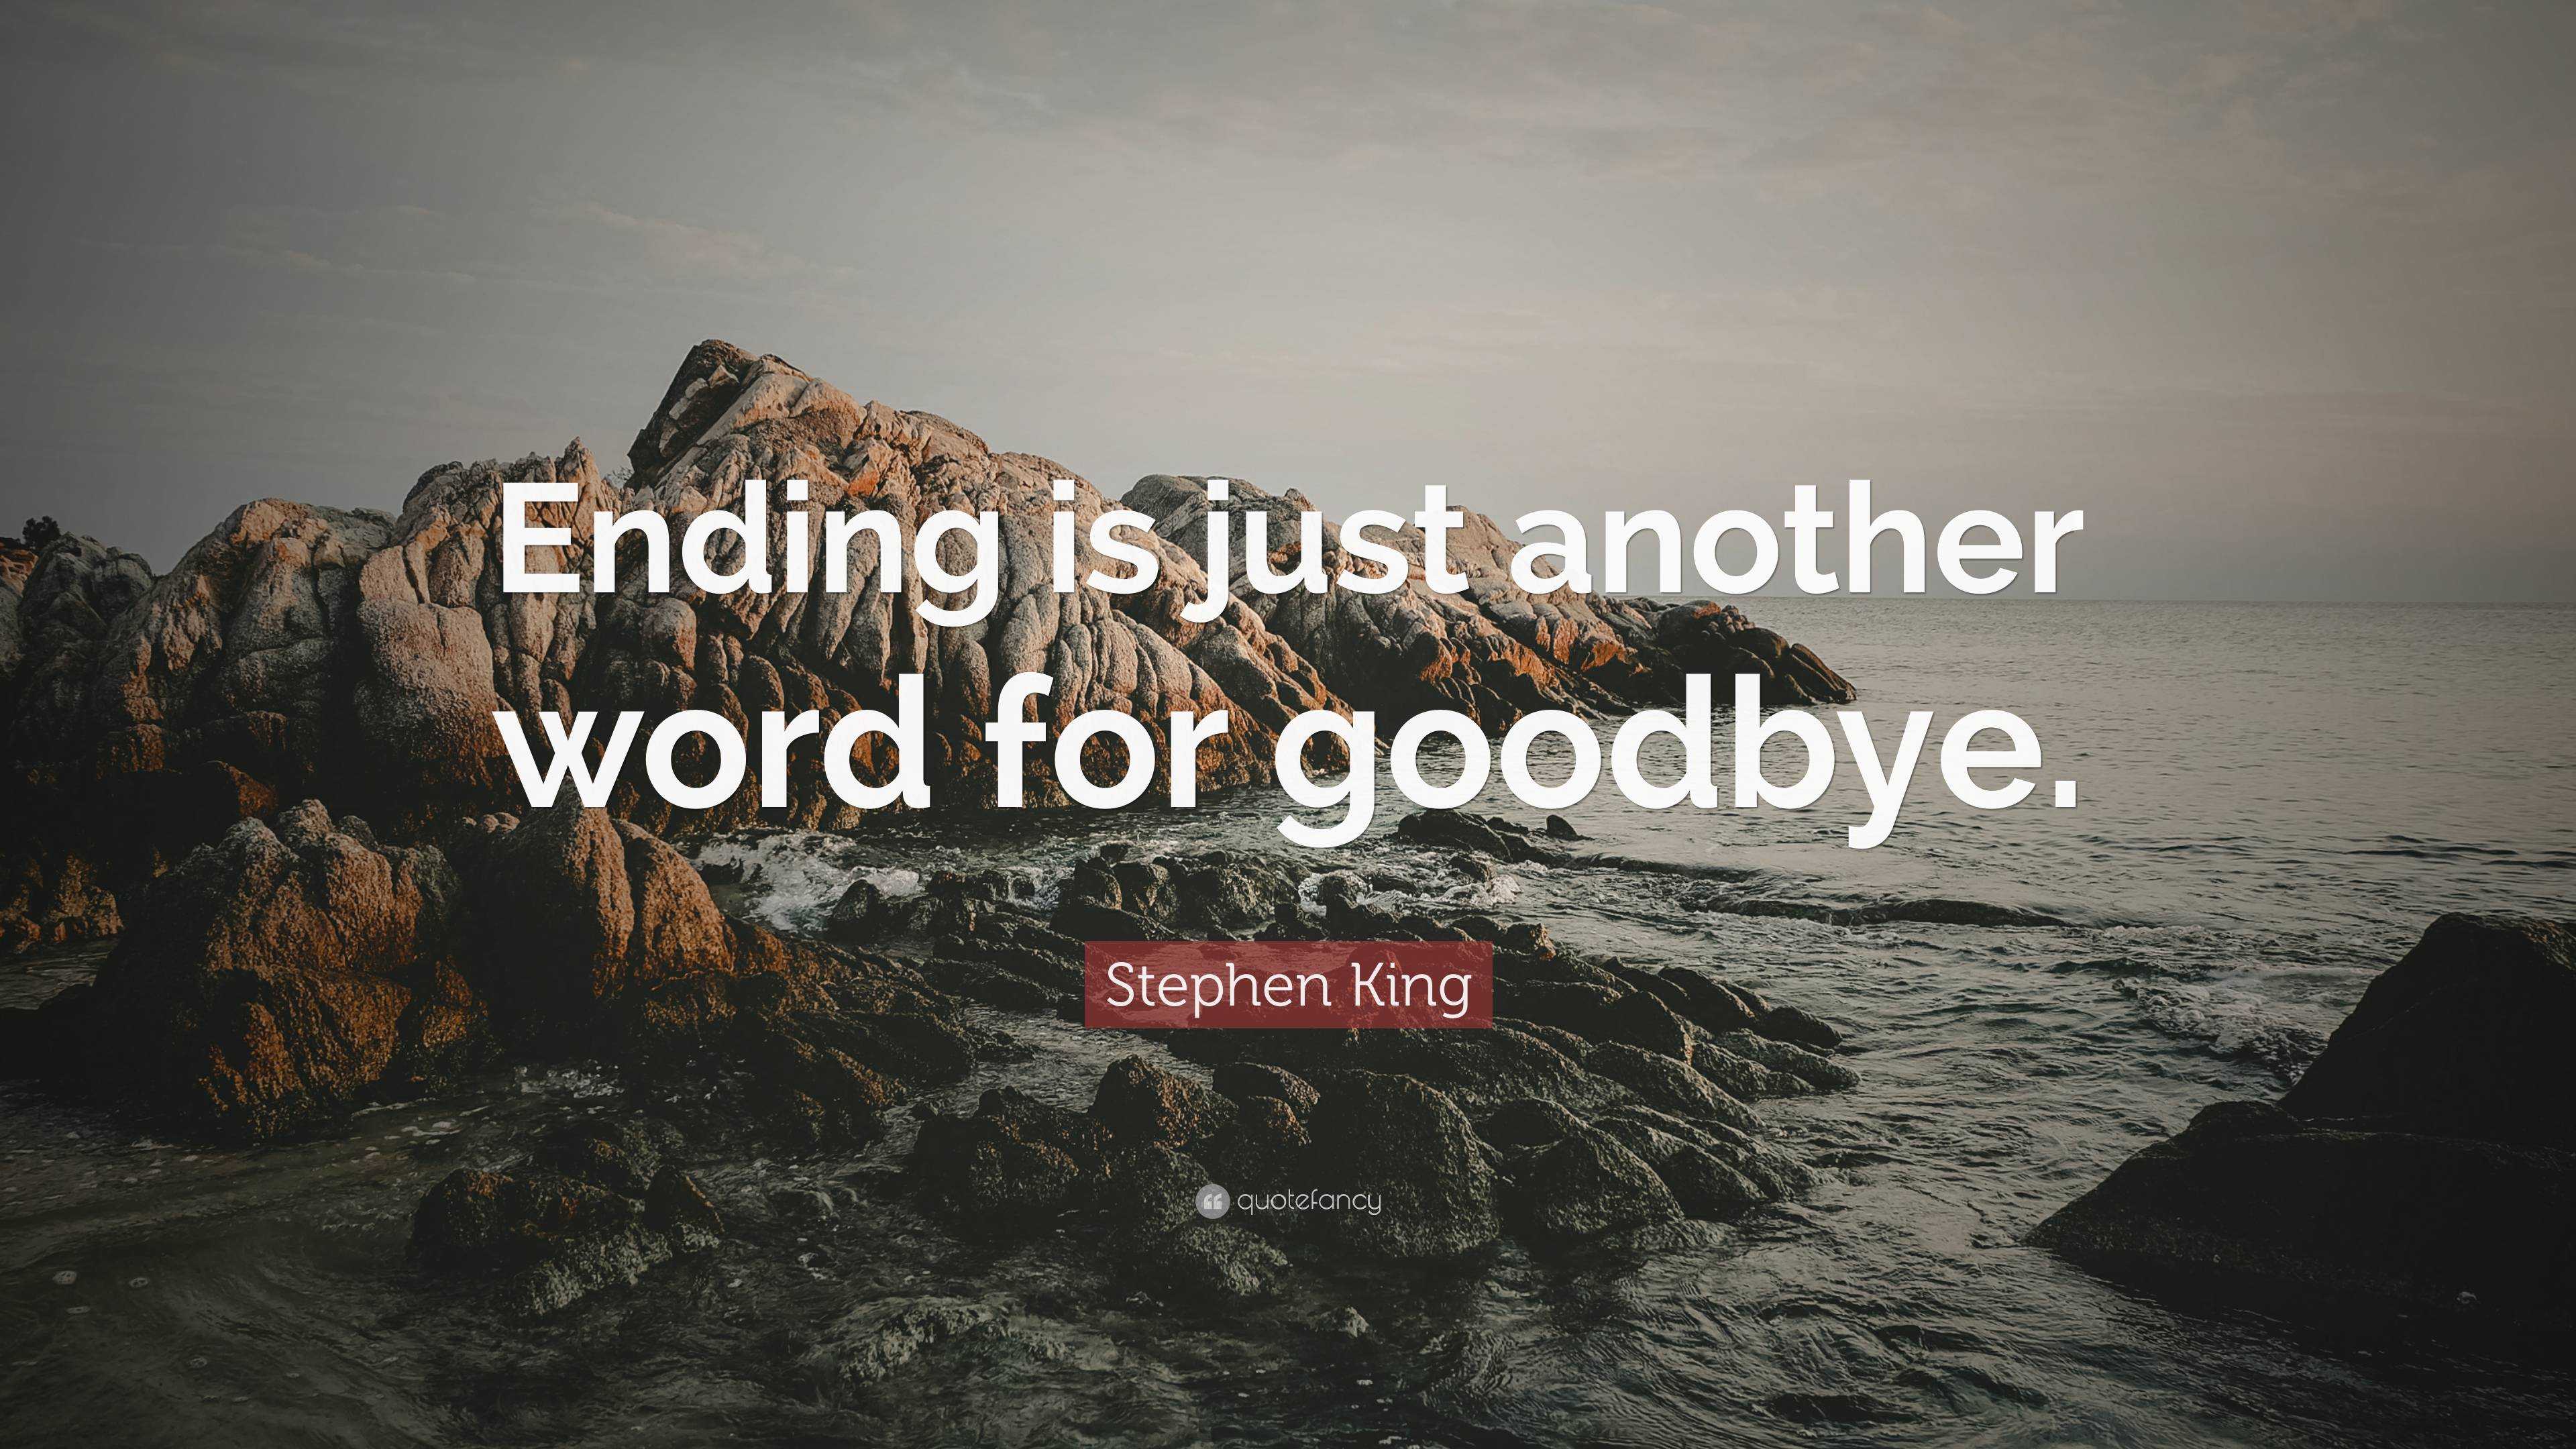 Endings and about goodbyes quotes Top 120